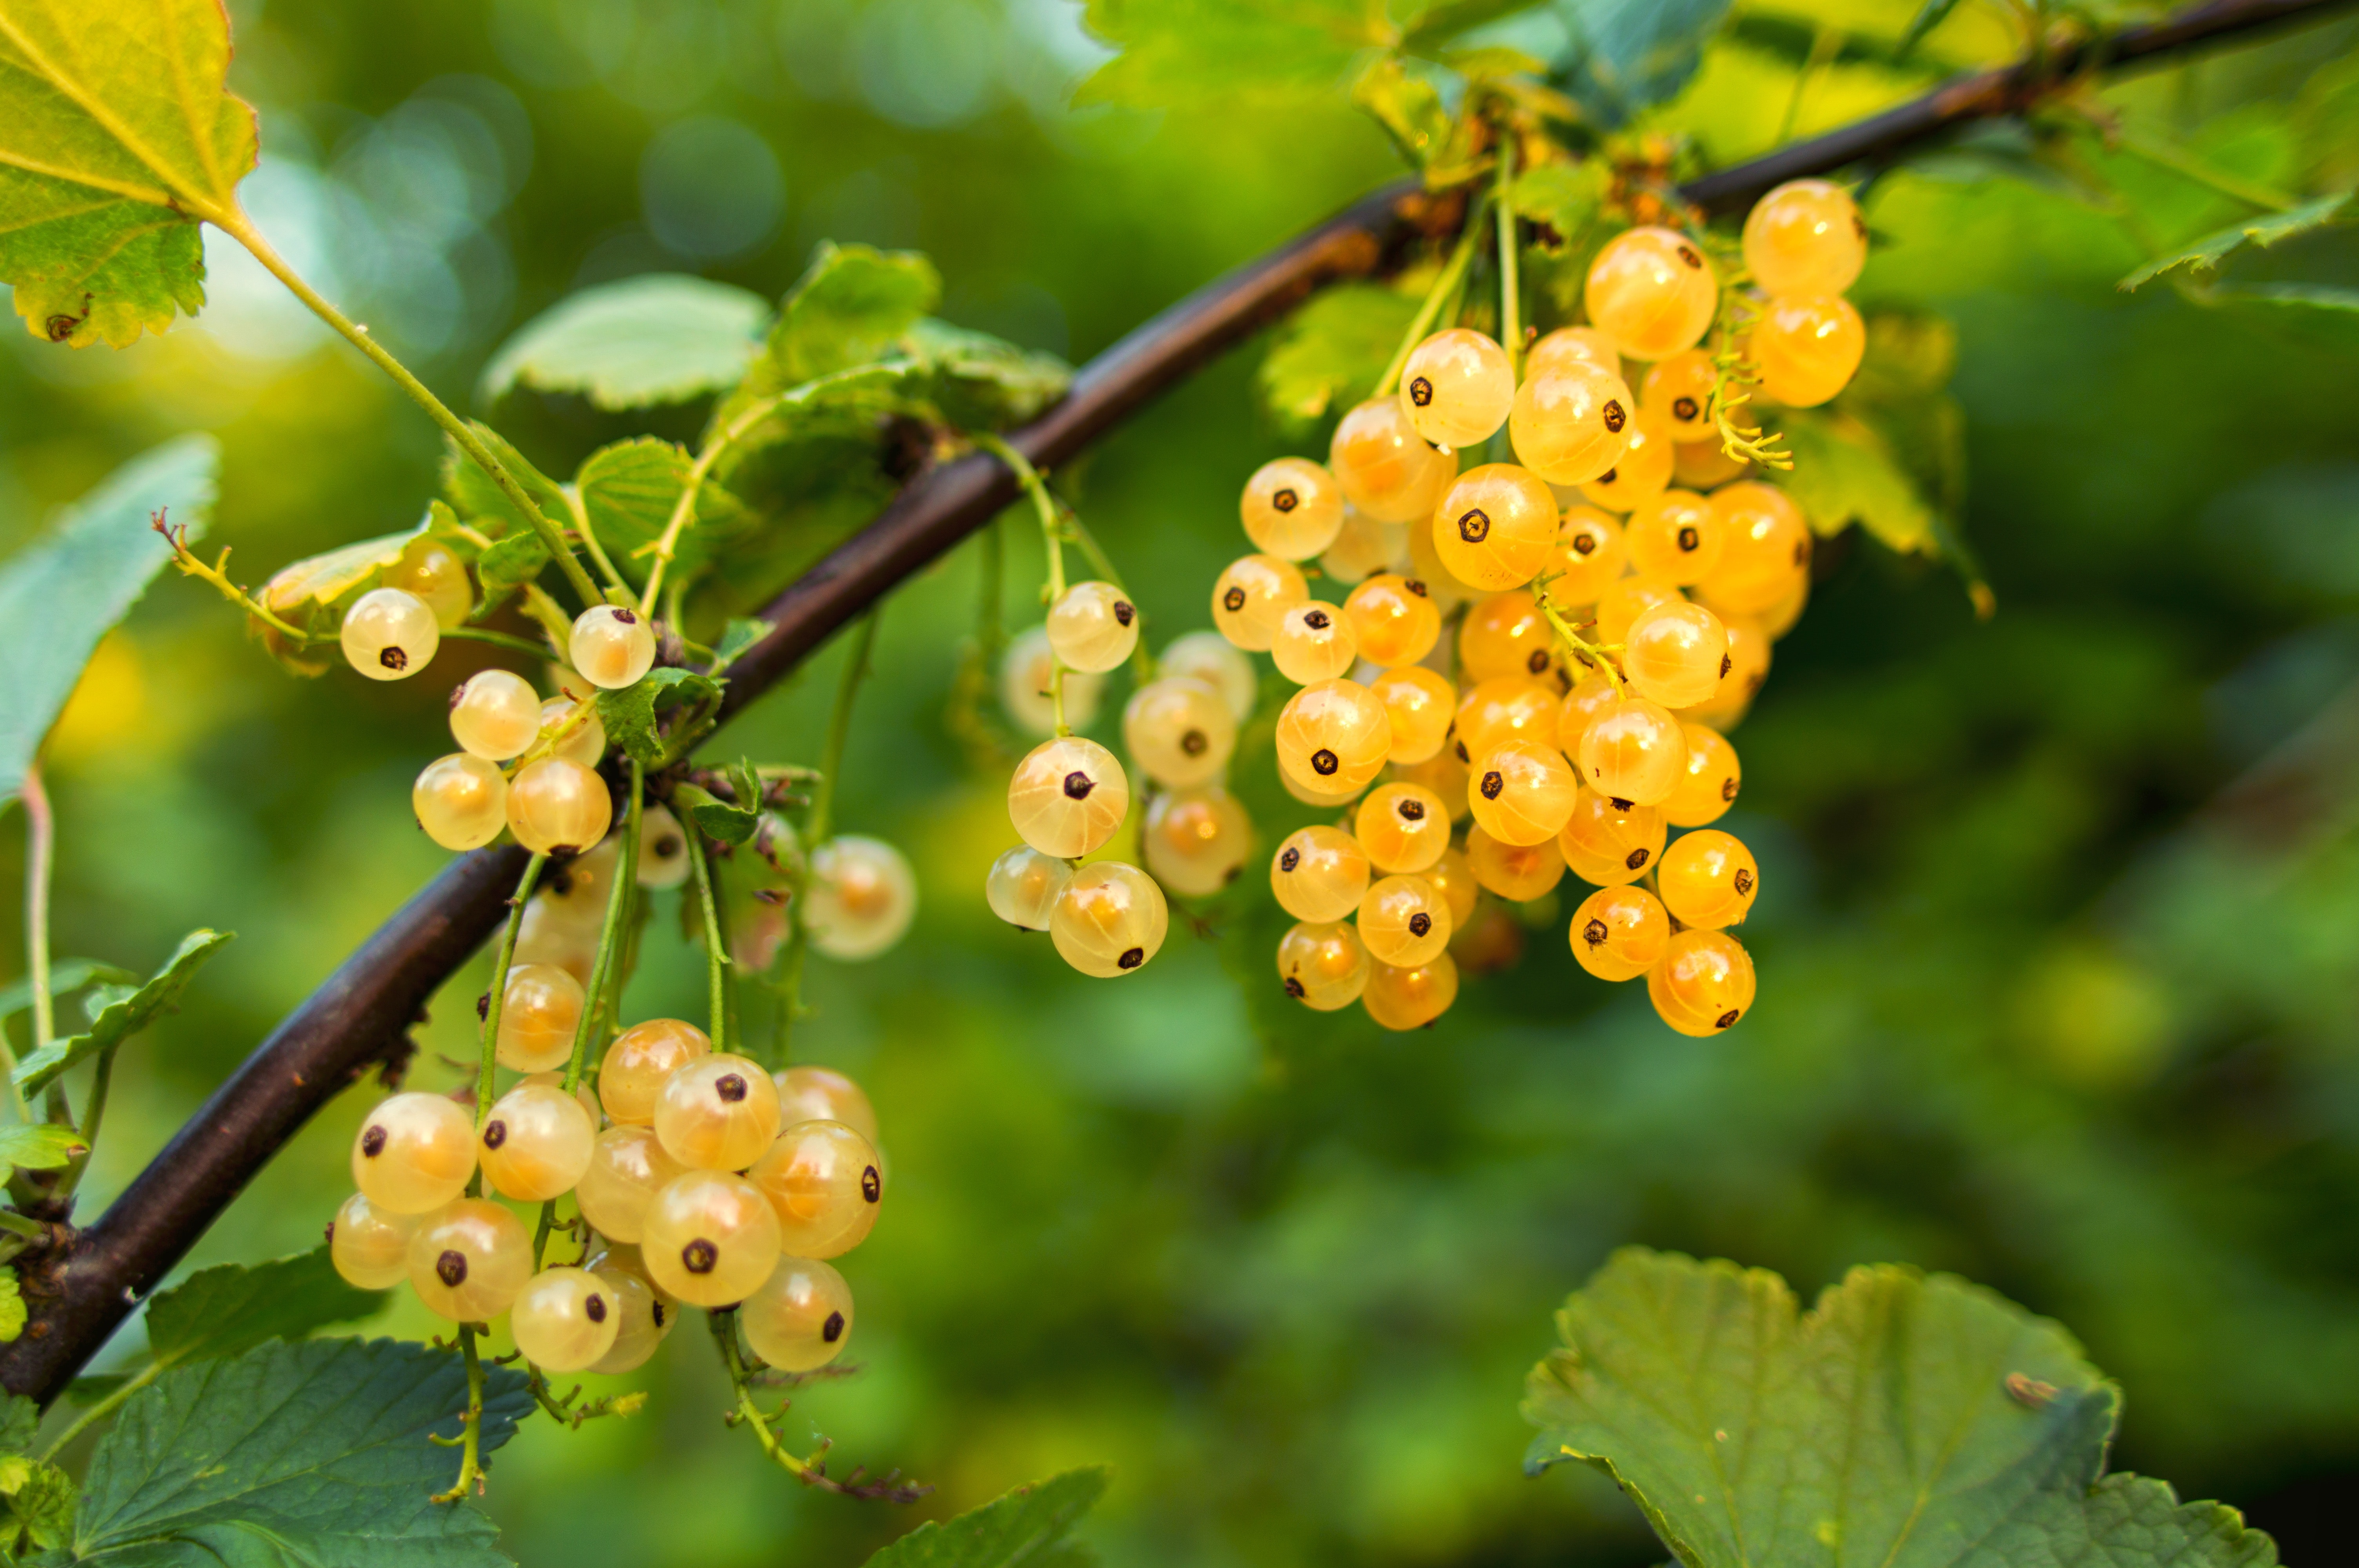 Yellow Round Berries during Daytime, Agriculture, Berries, Branch, Bunch, HQ Photo